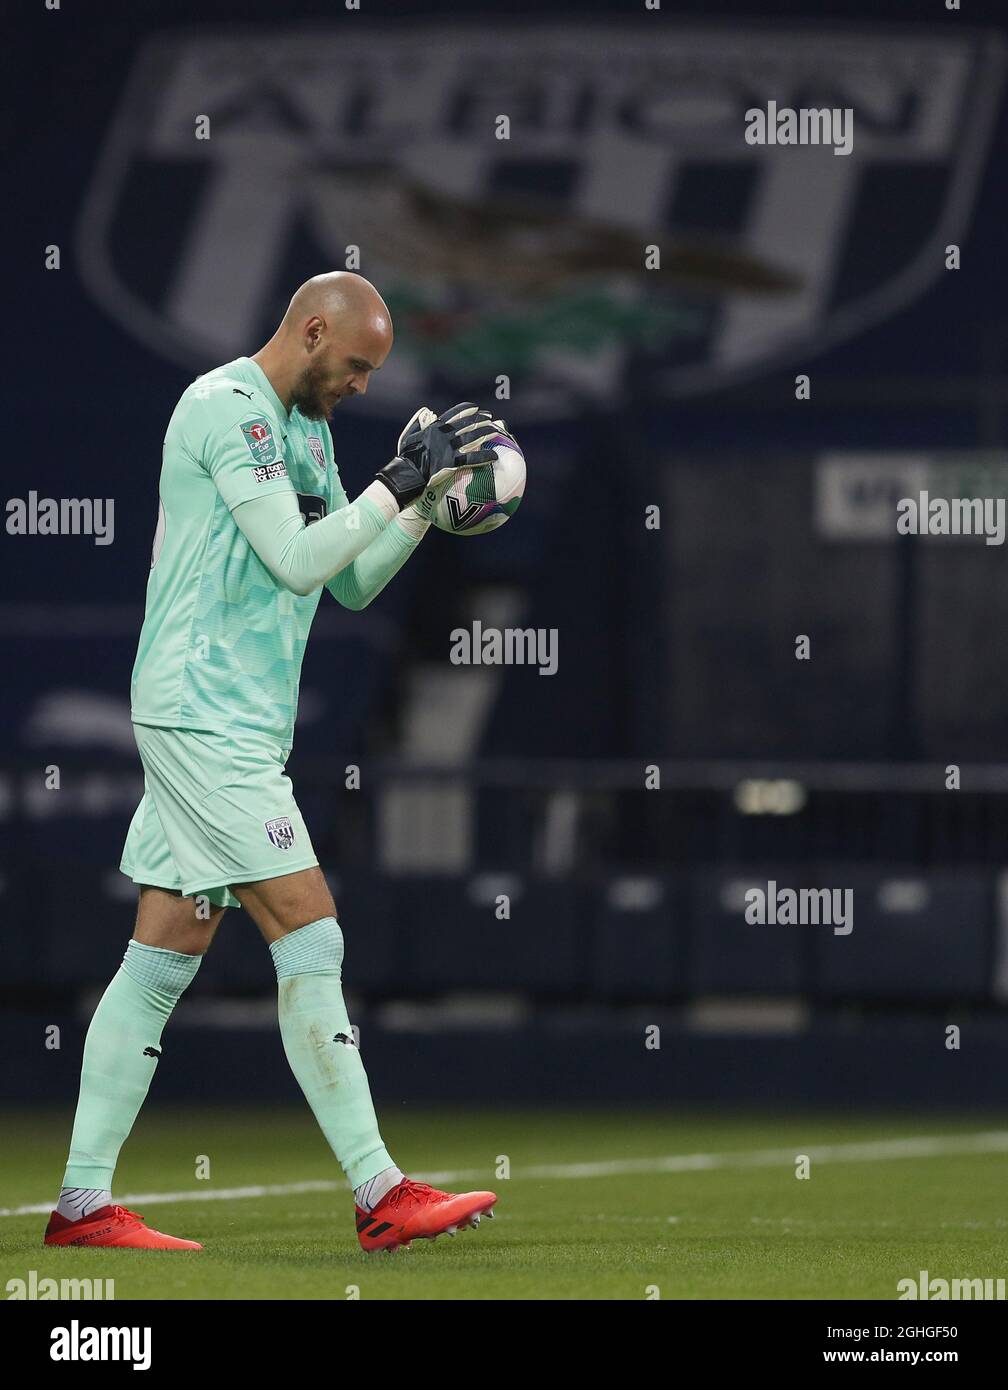 David Button of West Bromwich Albion during the Carabao Cup match at The Hawthorns, West Bromwich. Picture date: 16th September 2020. Picture credit should read: Darren Staples/Sportimage via PA Images Stock Photo